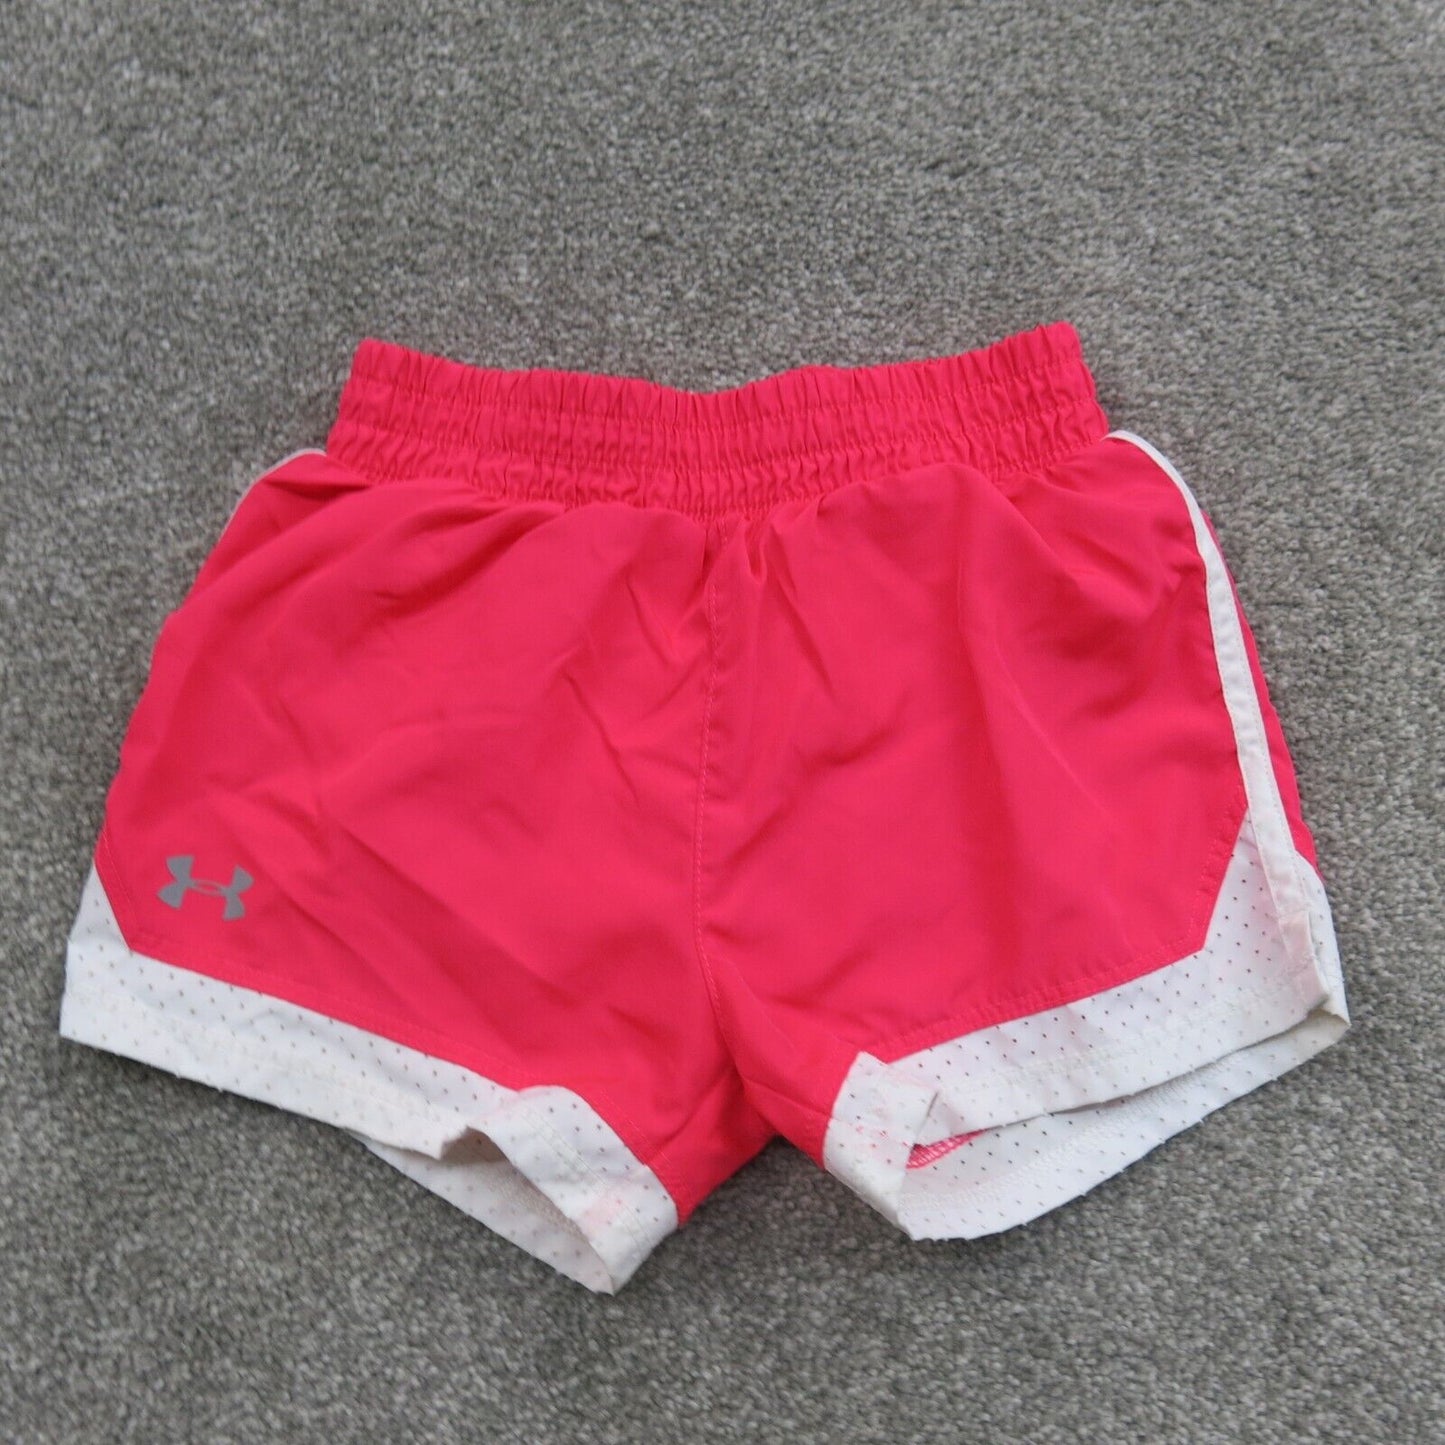 Under Armour Shorts Girls Size 4T Pink Solid Running & Jogging Athleti